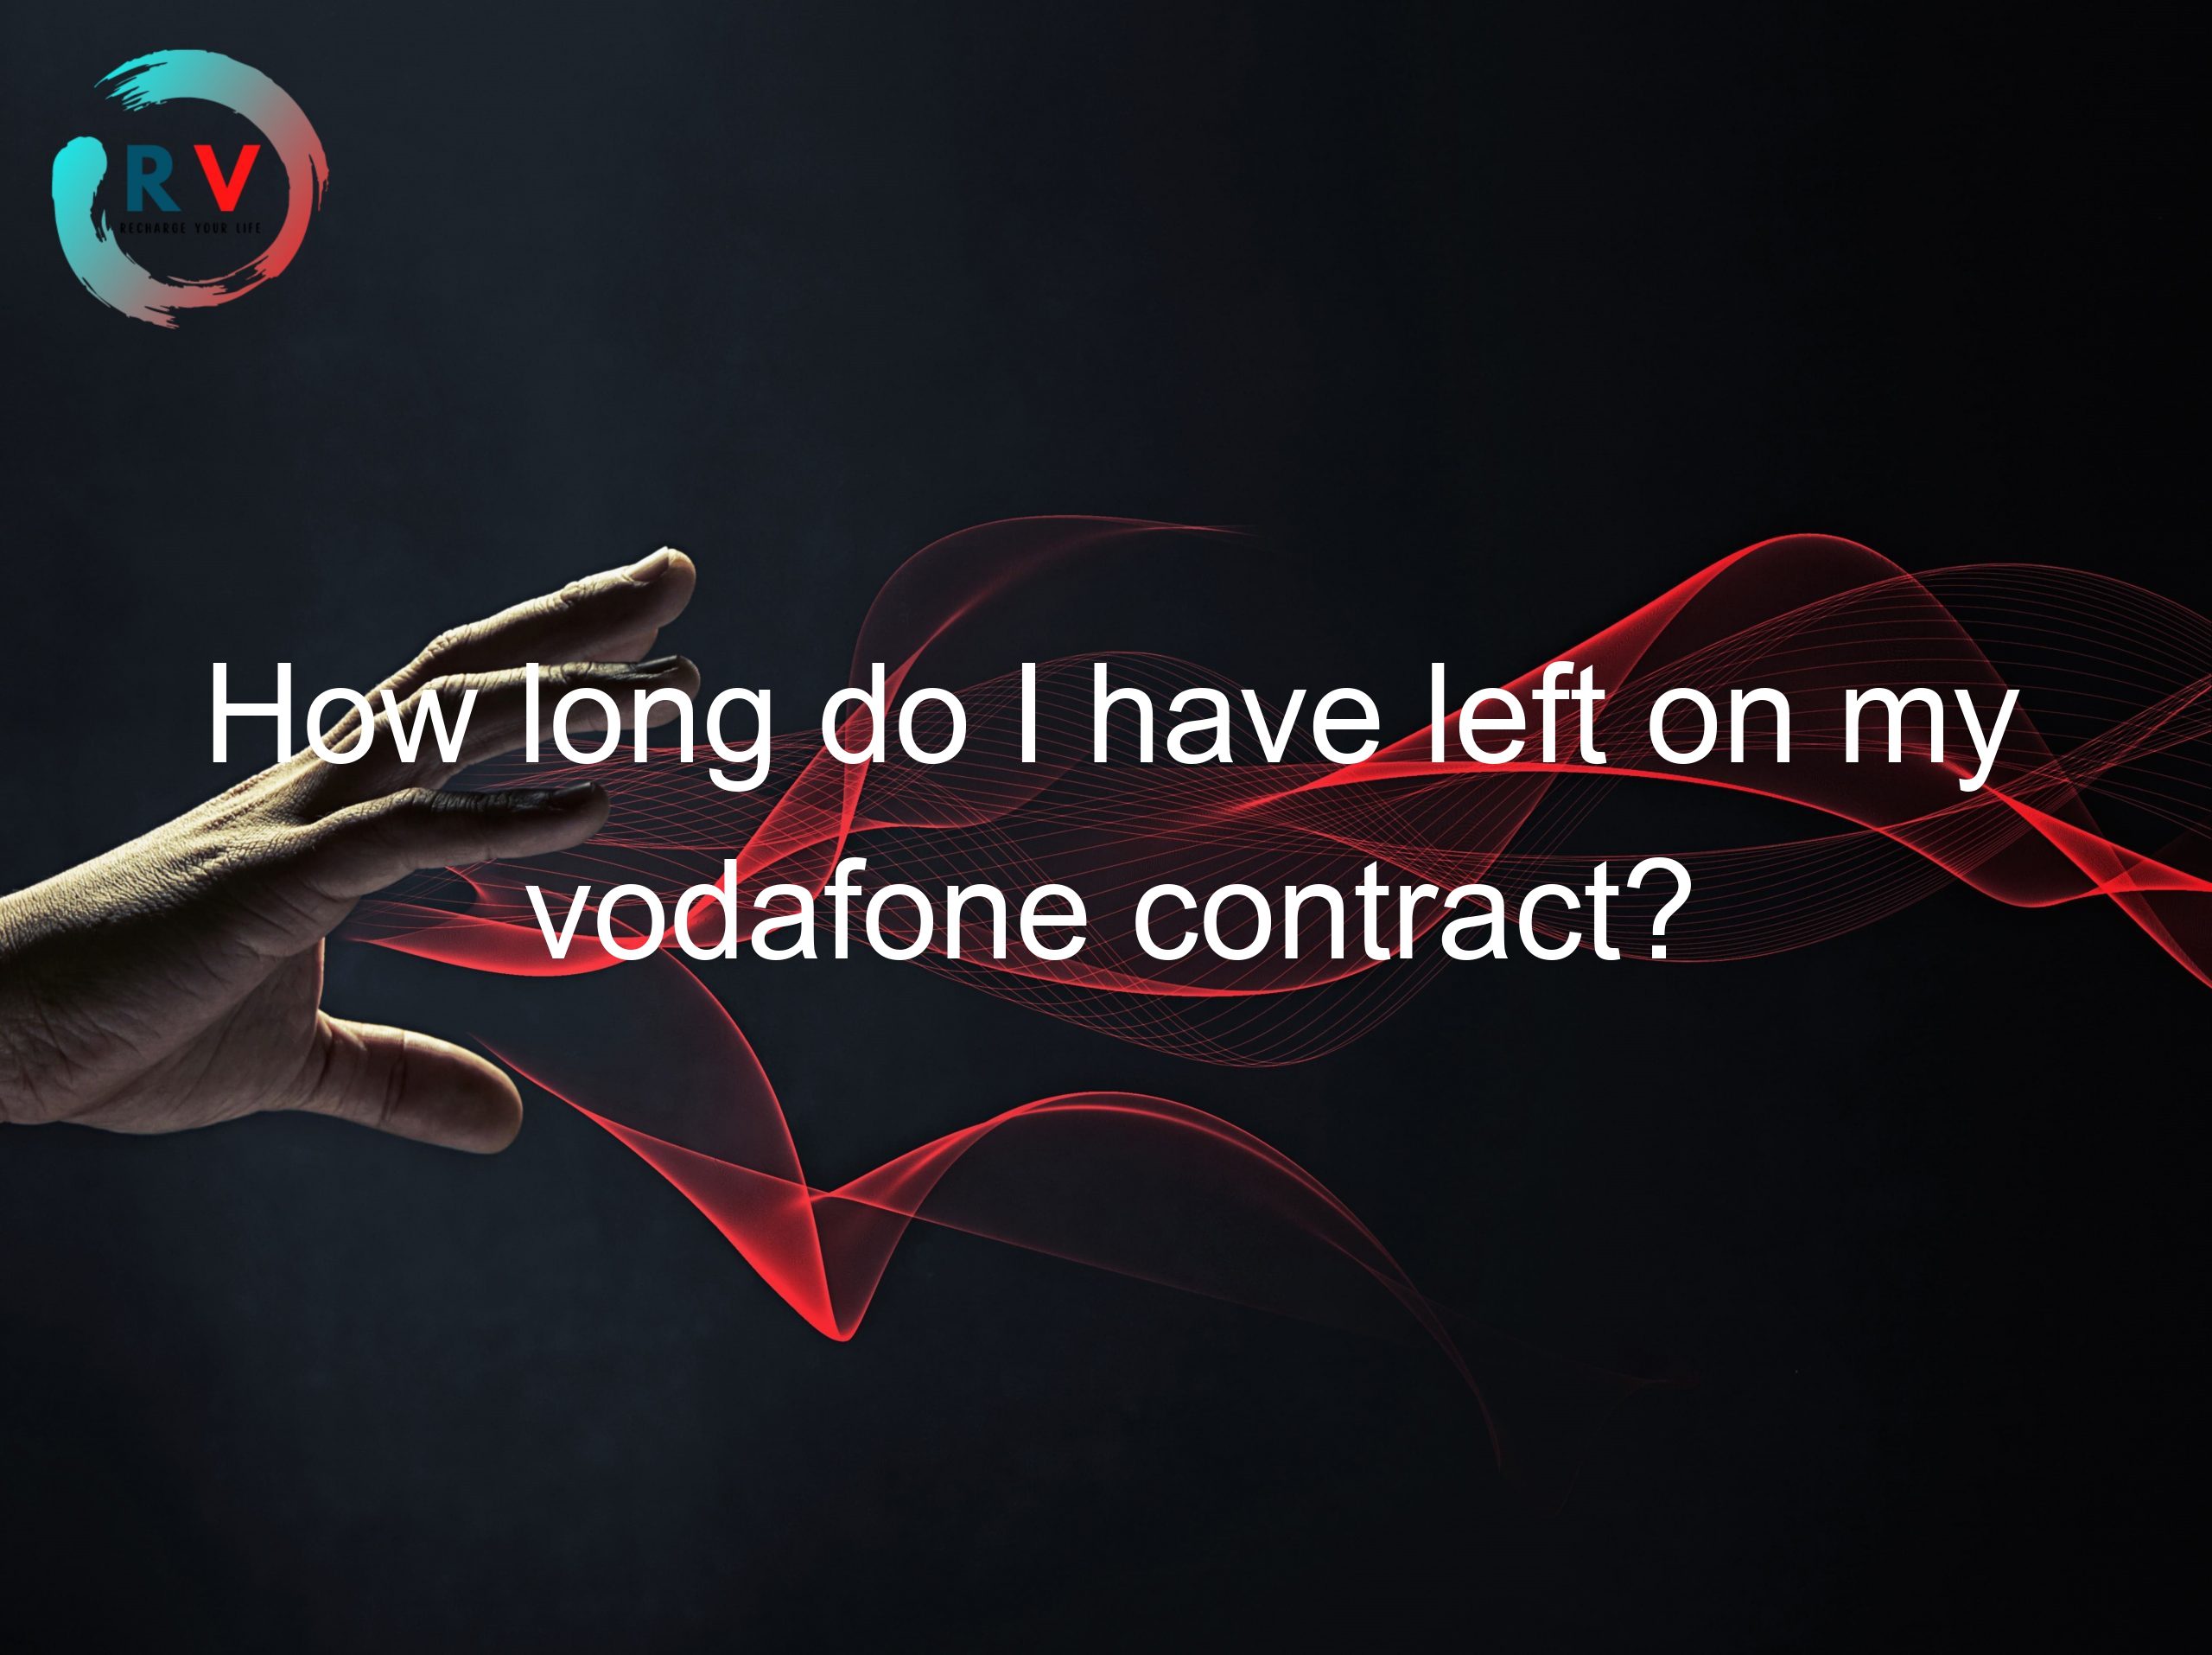 How long do I have left on my vodafone contract? - Find out now!